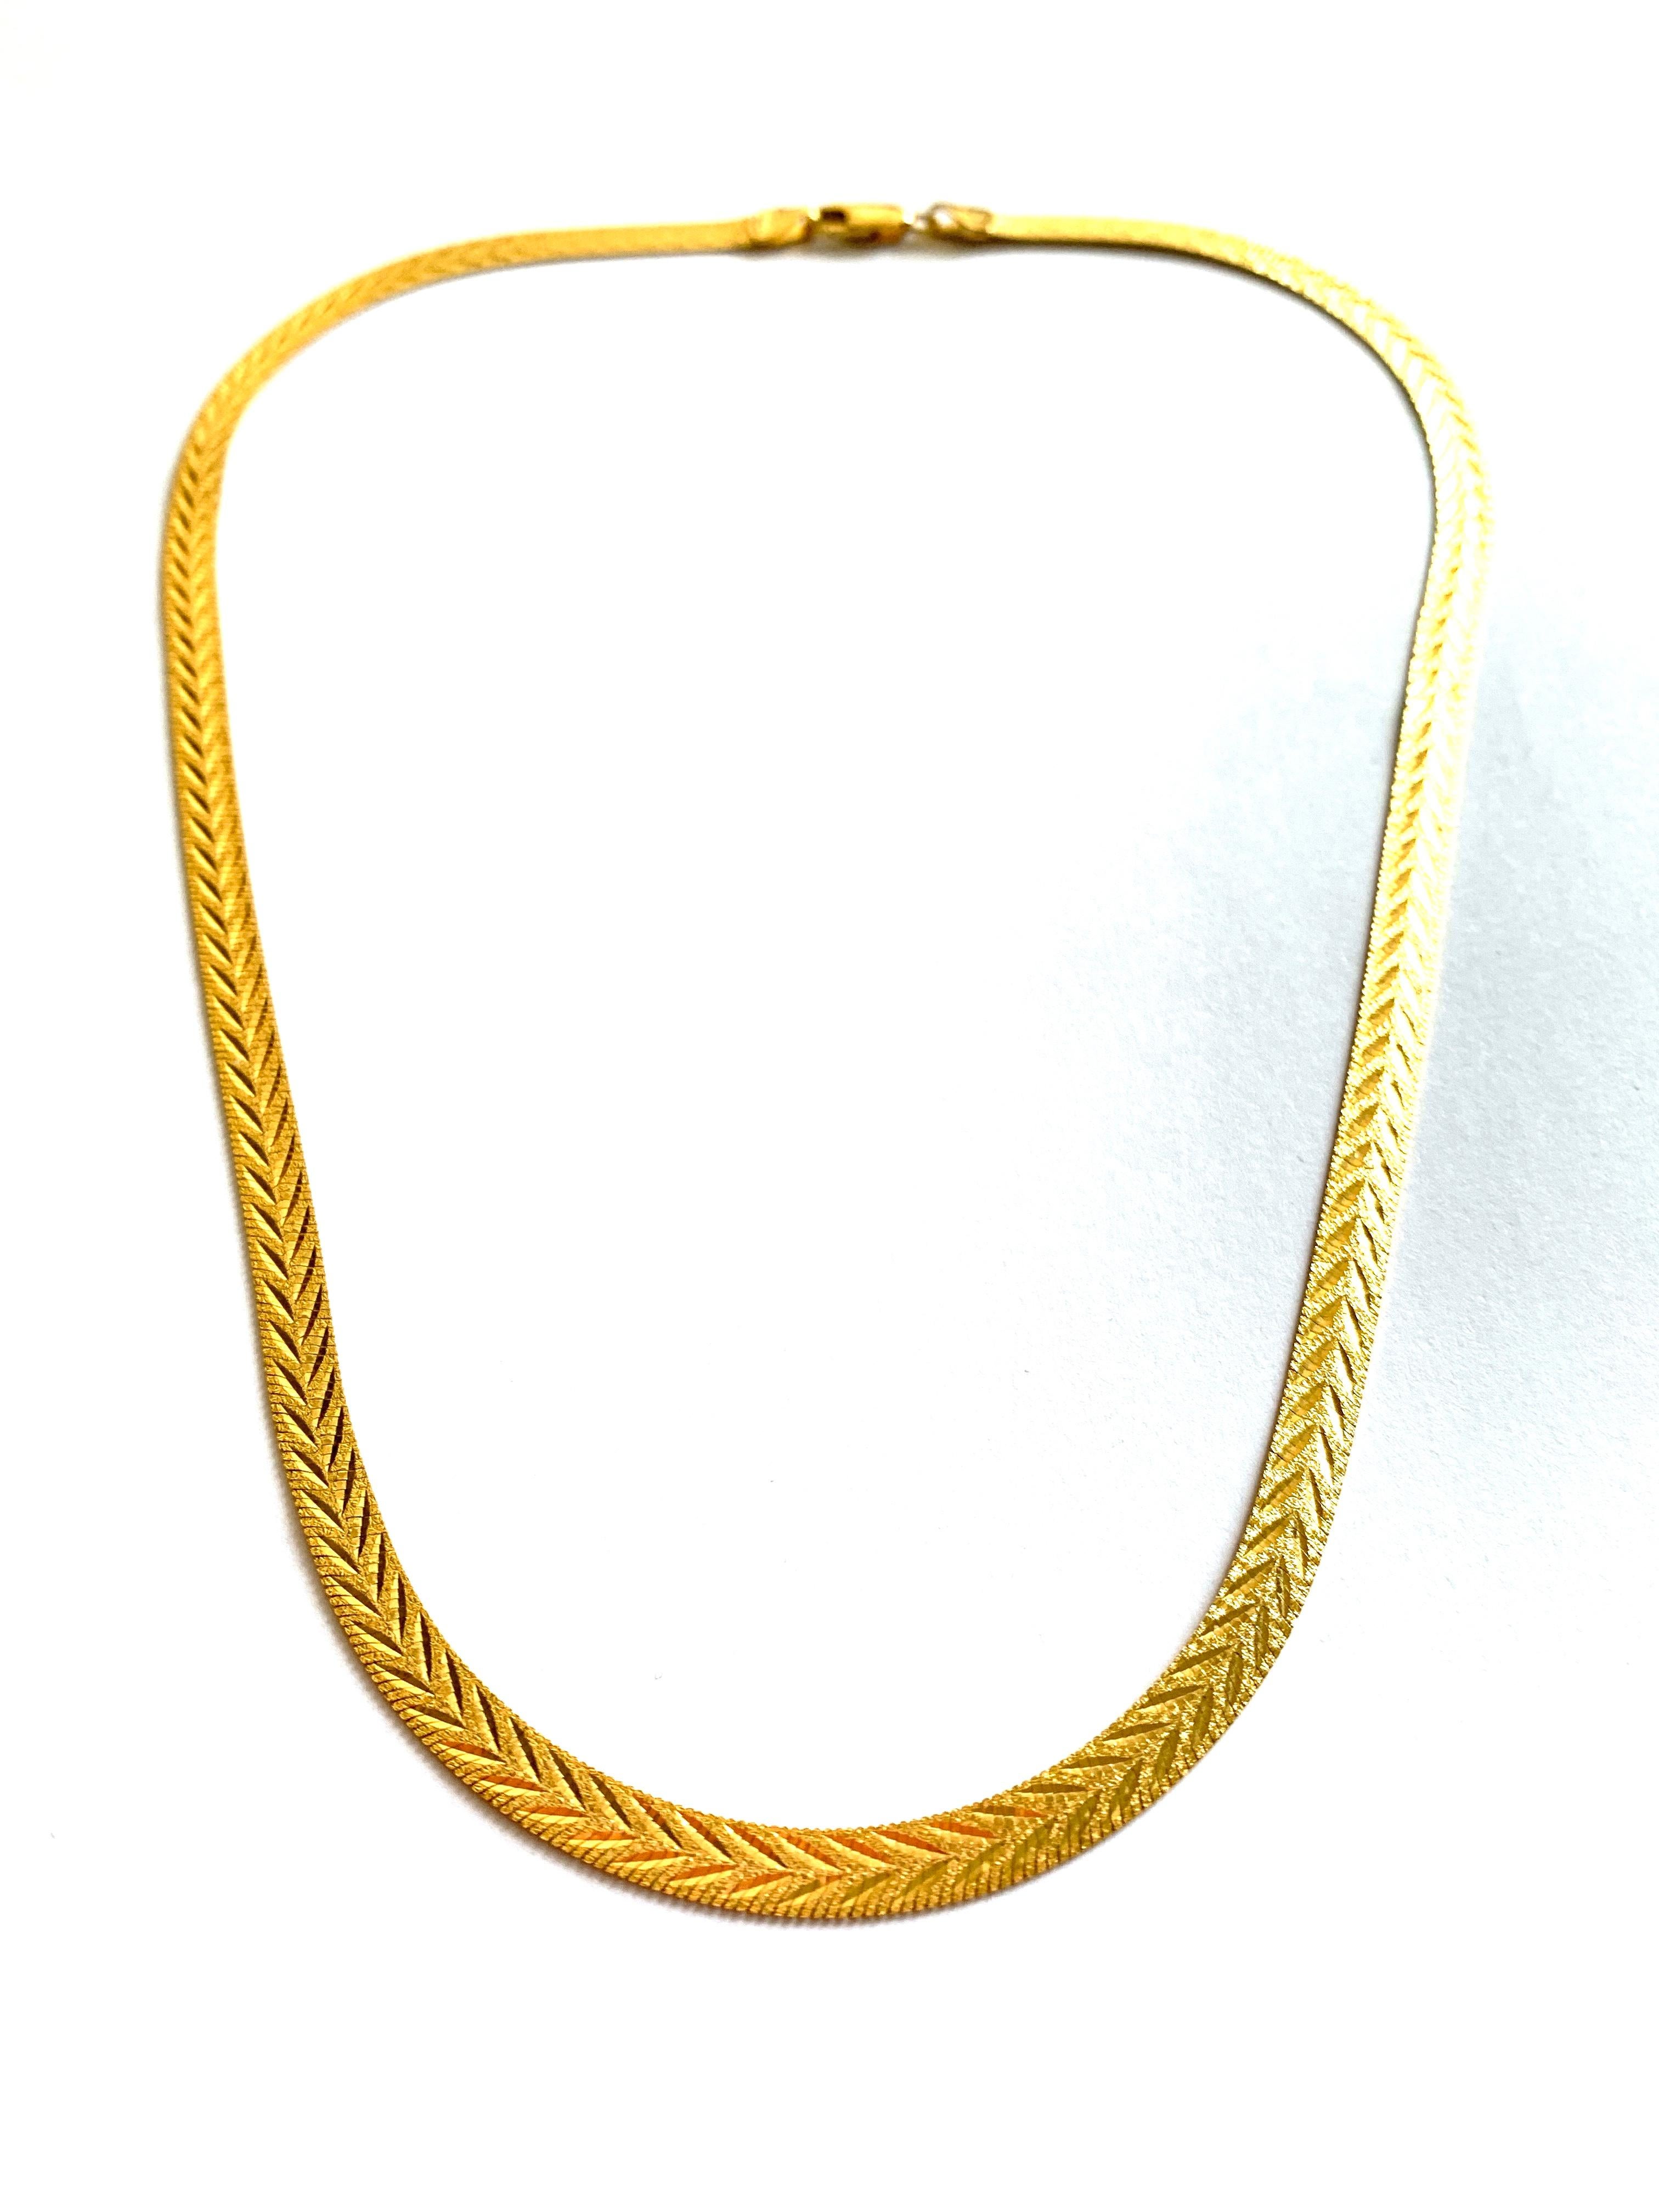 14ct 585 Gold
Flat serpentine necklace
Fully Hallmarked by London assay offices
Circa 1980s
Weight 10.4 grammes
Length 18 Inches
Very Good Condition 